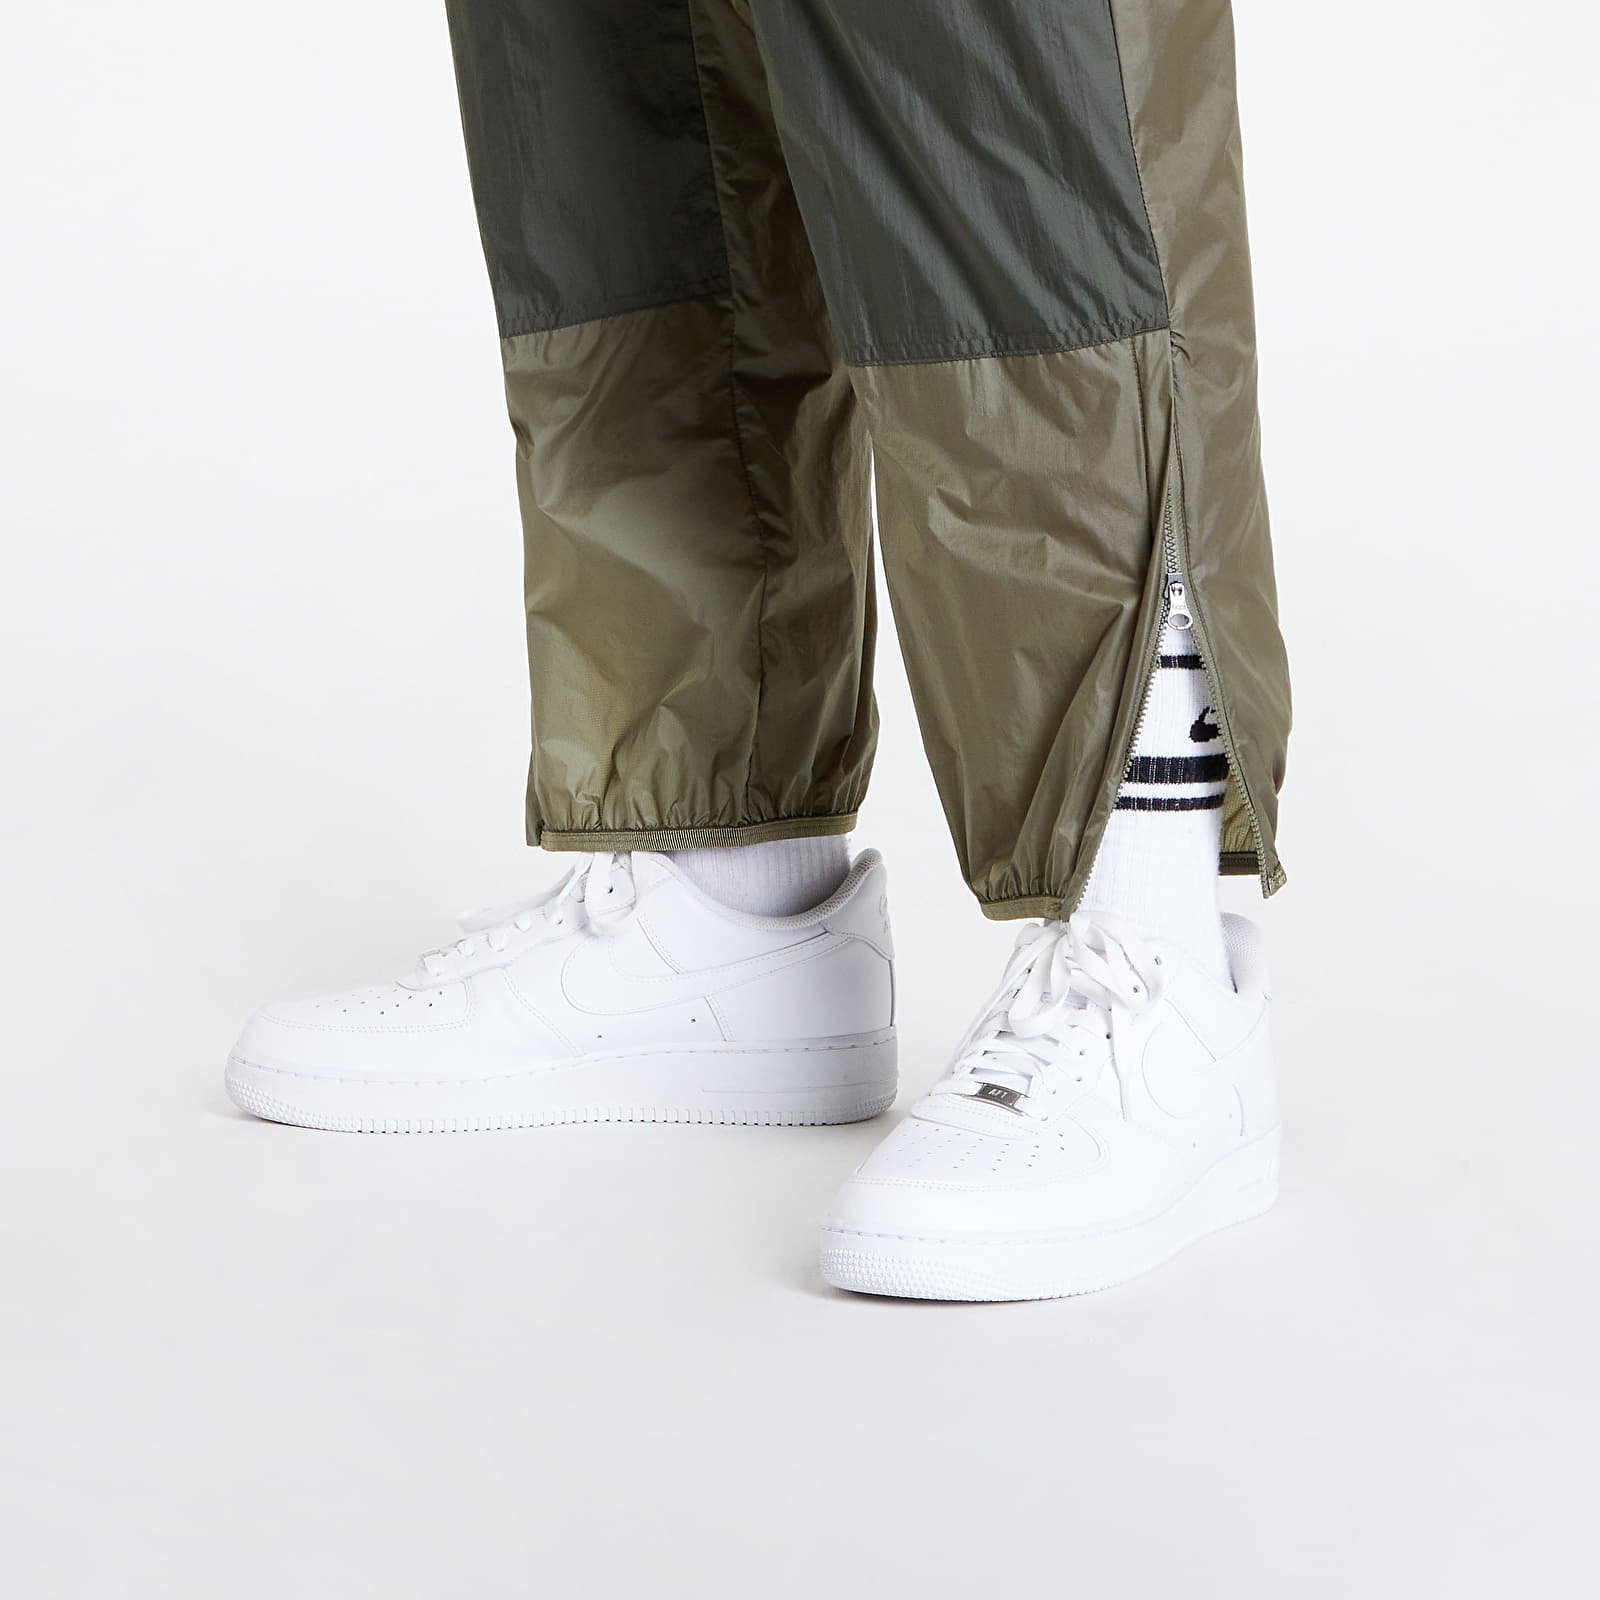 Cinder Cone Windshell Pants